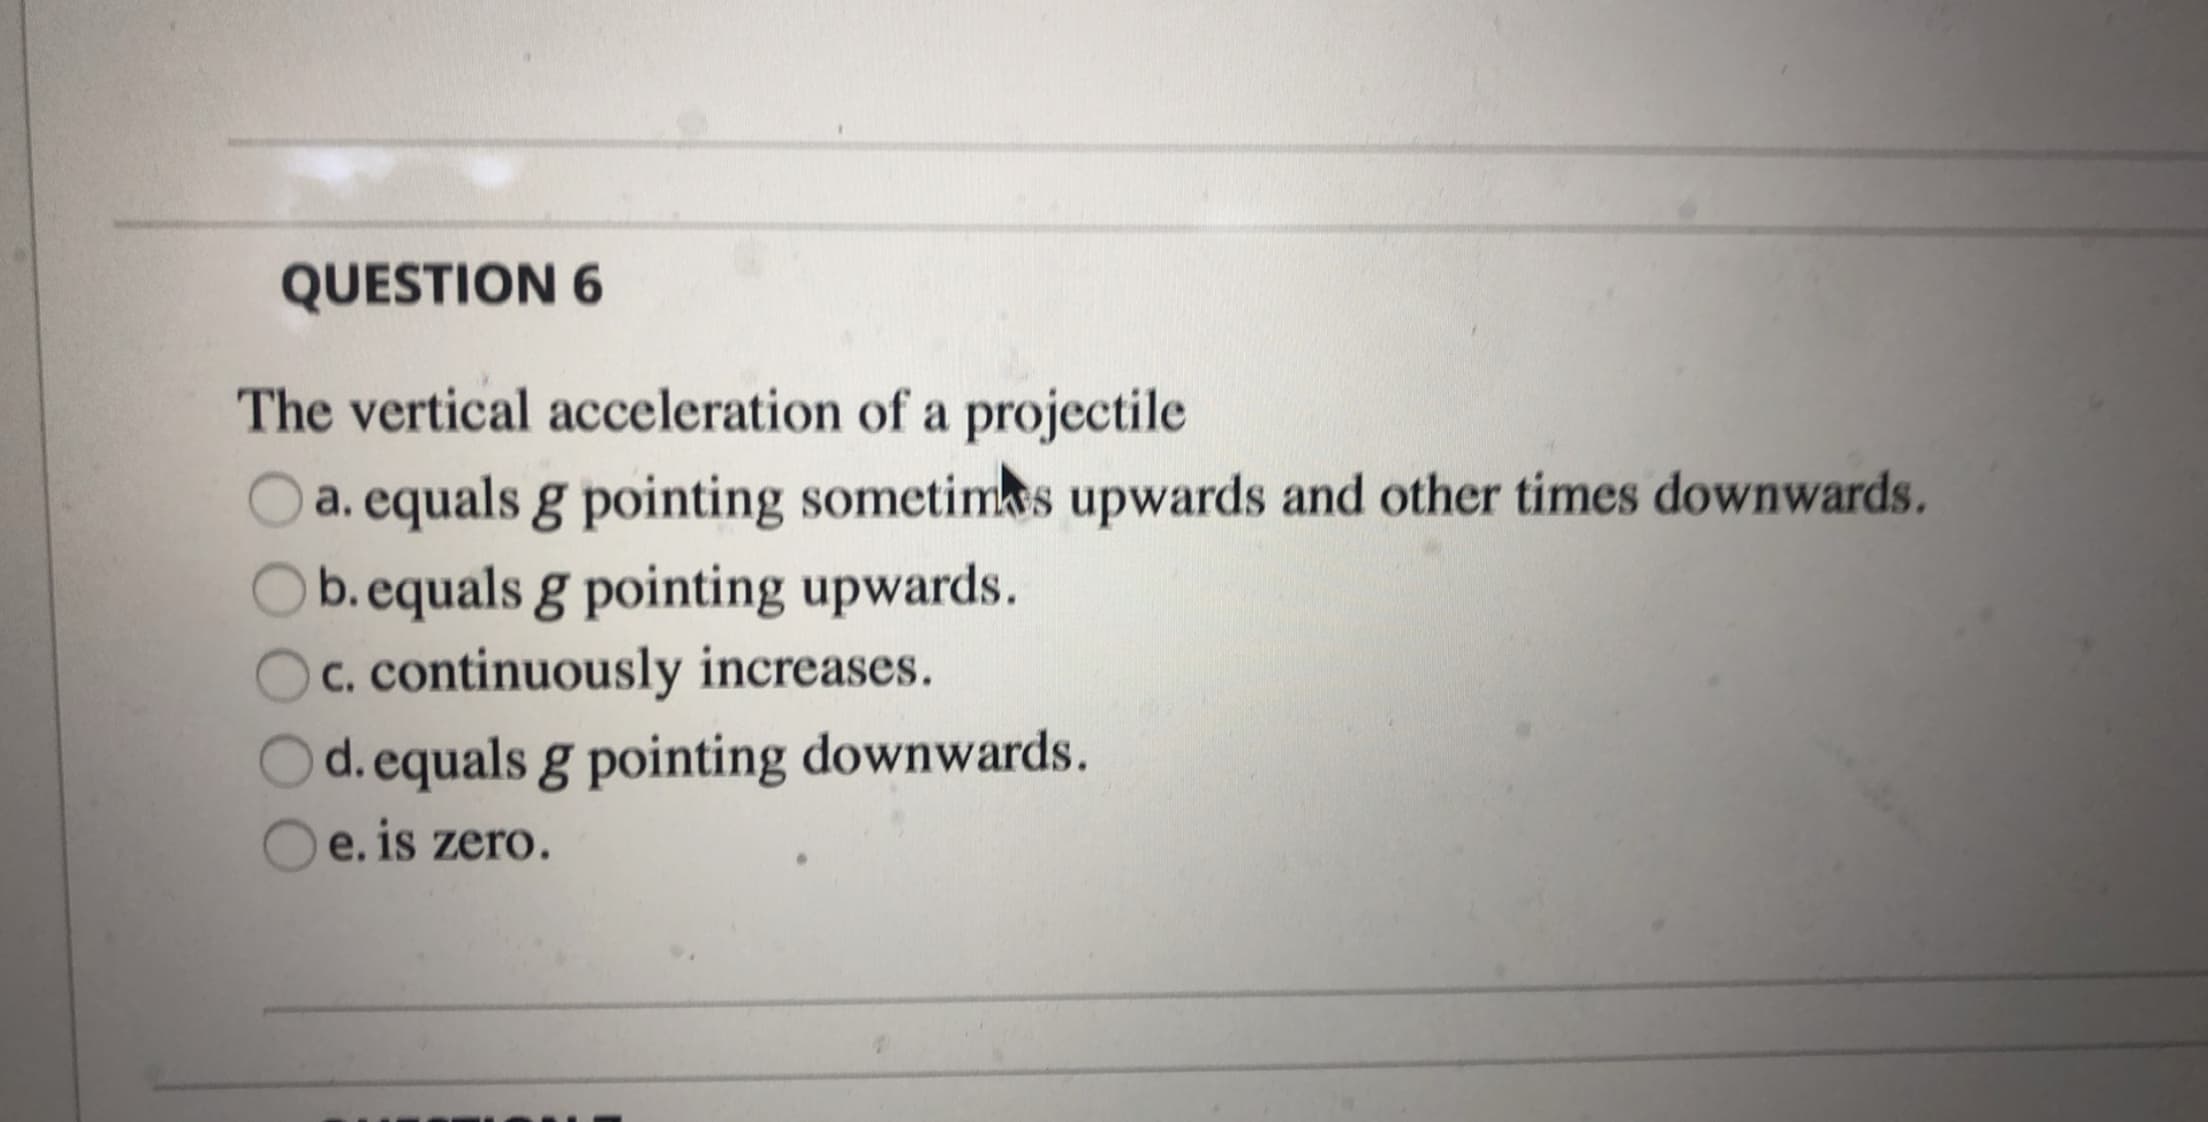 The vertical acceleration of a projectile
O a. equals g pointing sometims upwards and other times downwards.
b.equals g pointing upwards.
c. continuously increases.
d.equals g pointing downwards.
e. is zero.
